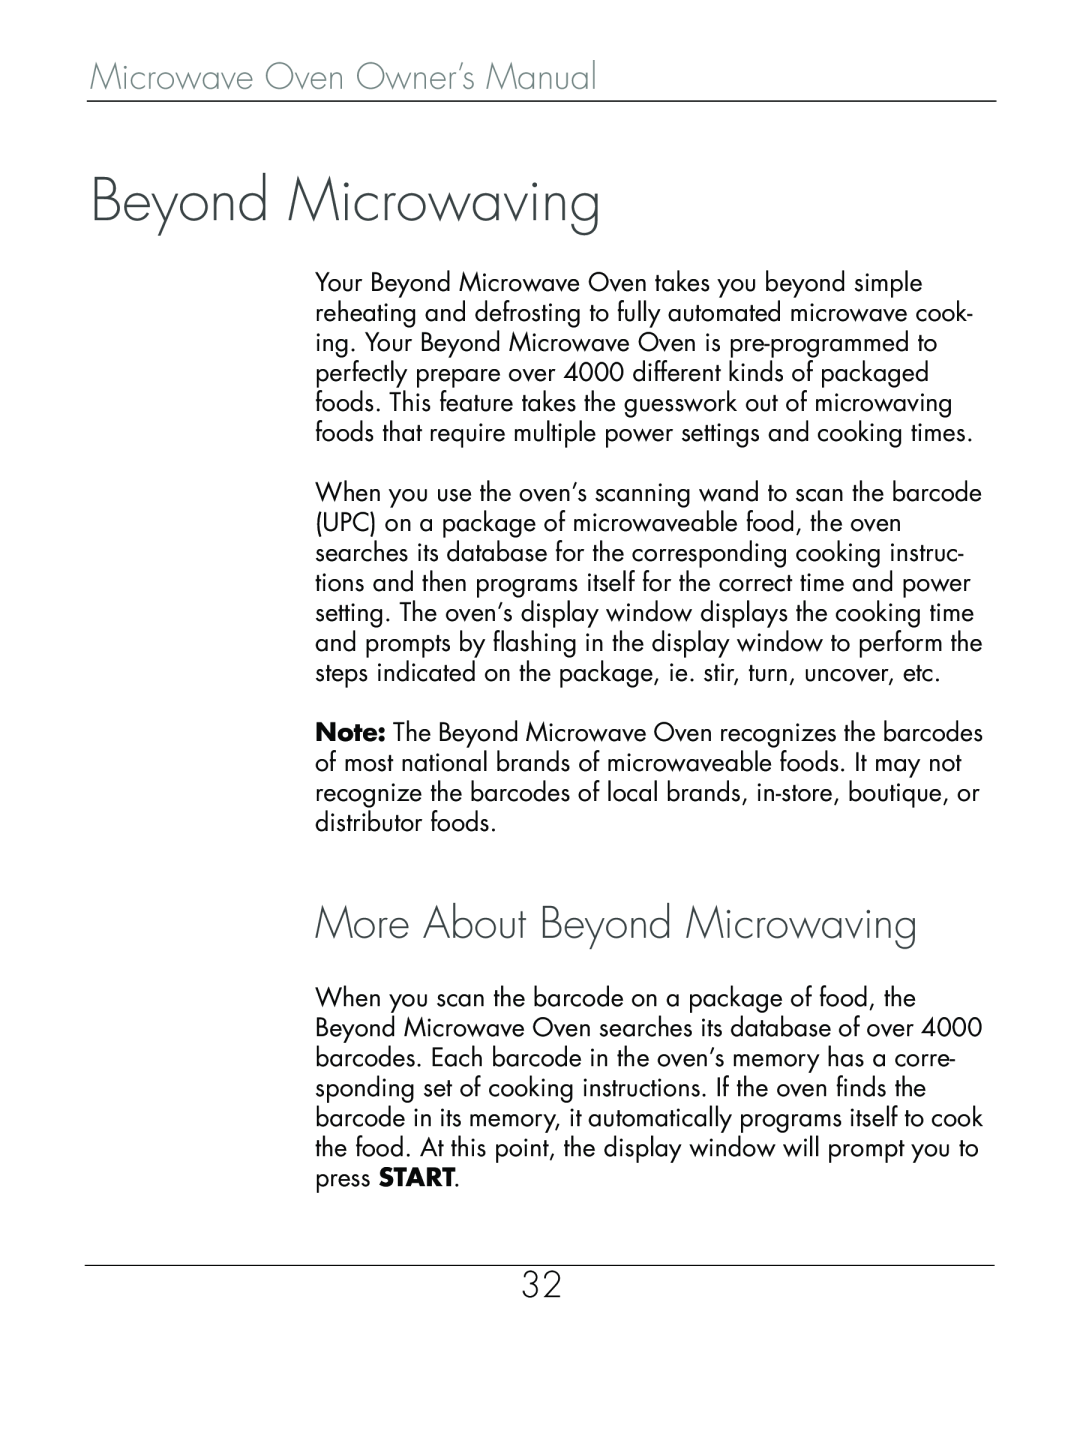 Beyond Microwace Oven manual More About Beyond Microwaving 